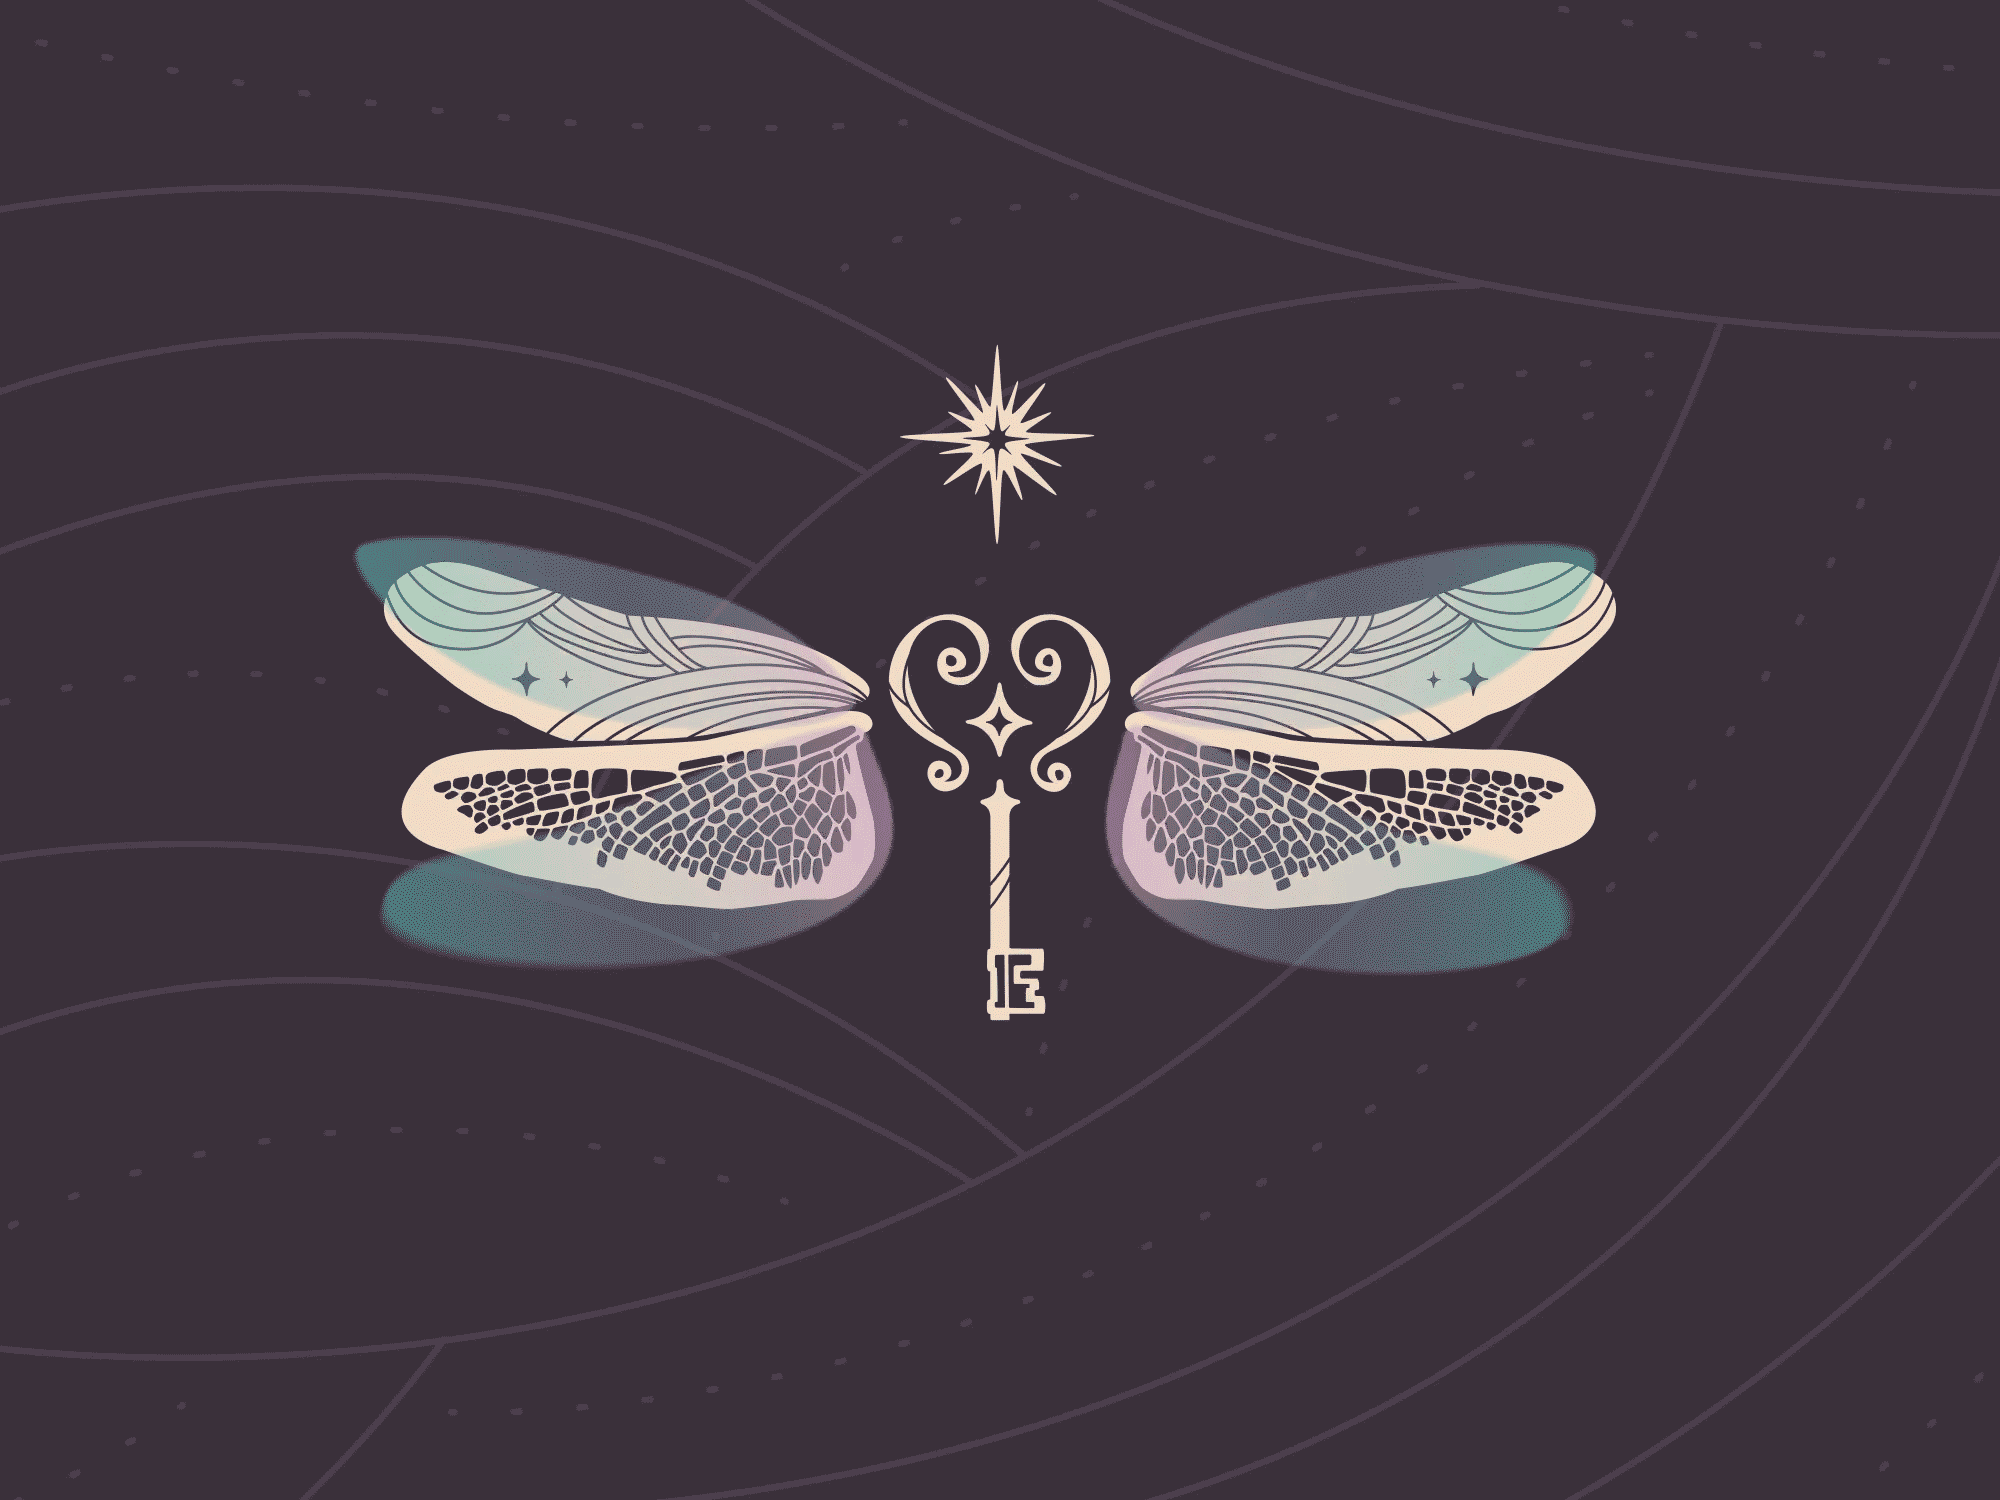 Winged Key animation dream dreamy fairy tale flapping wings illustration key shine spark star wings